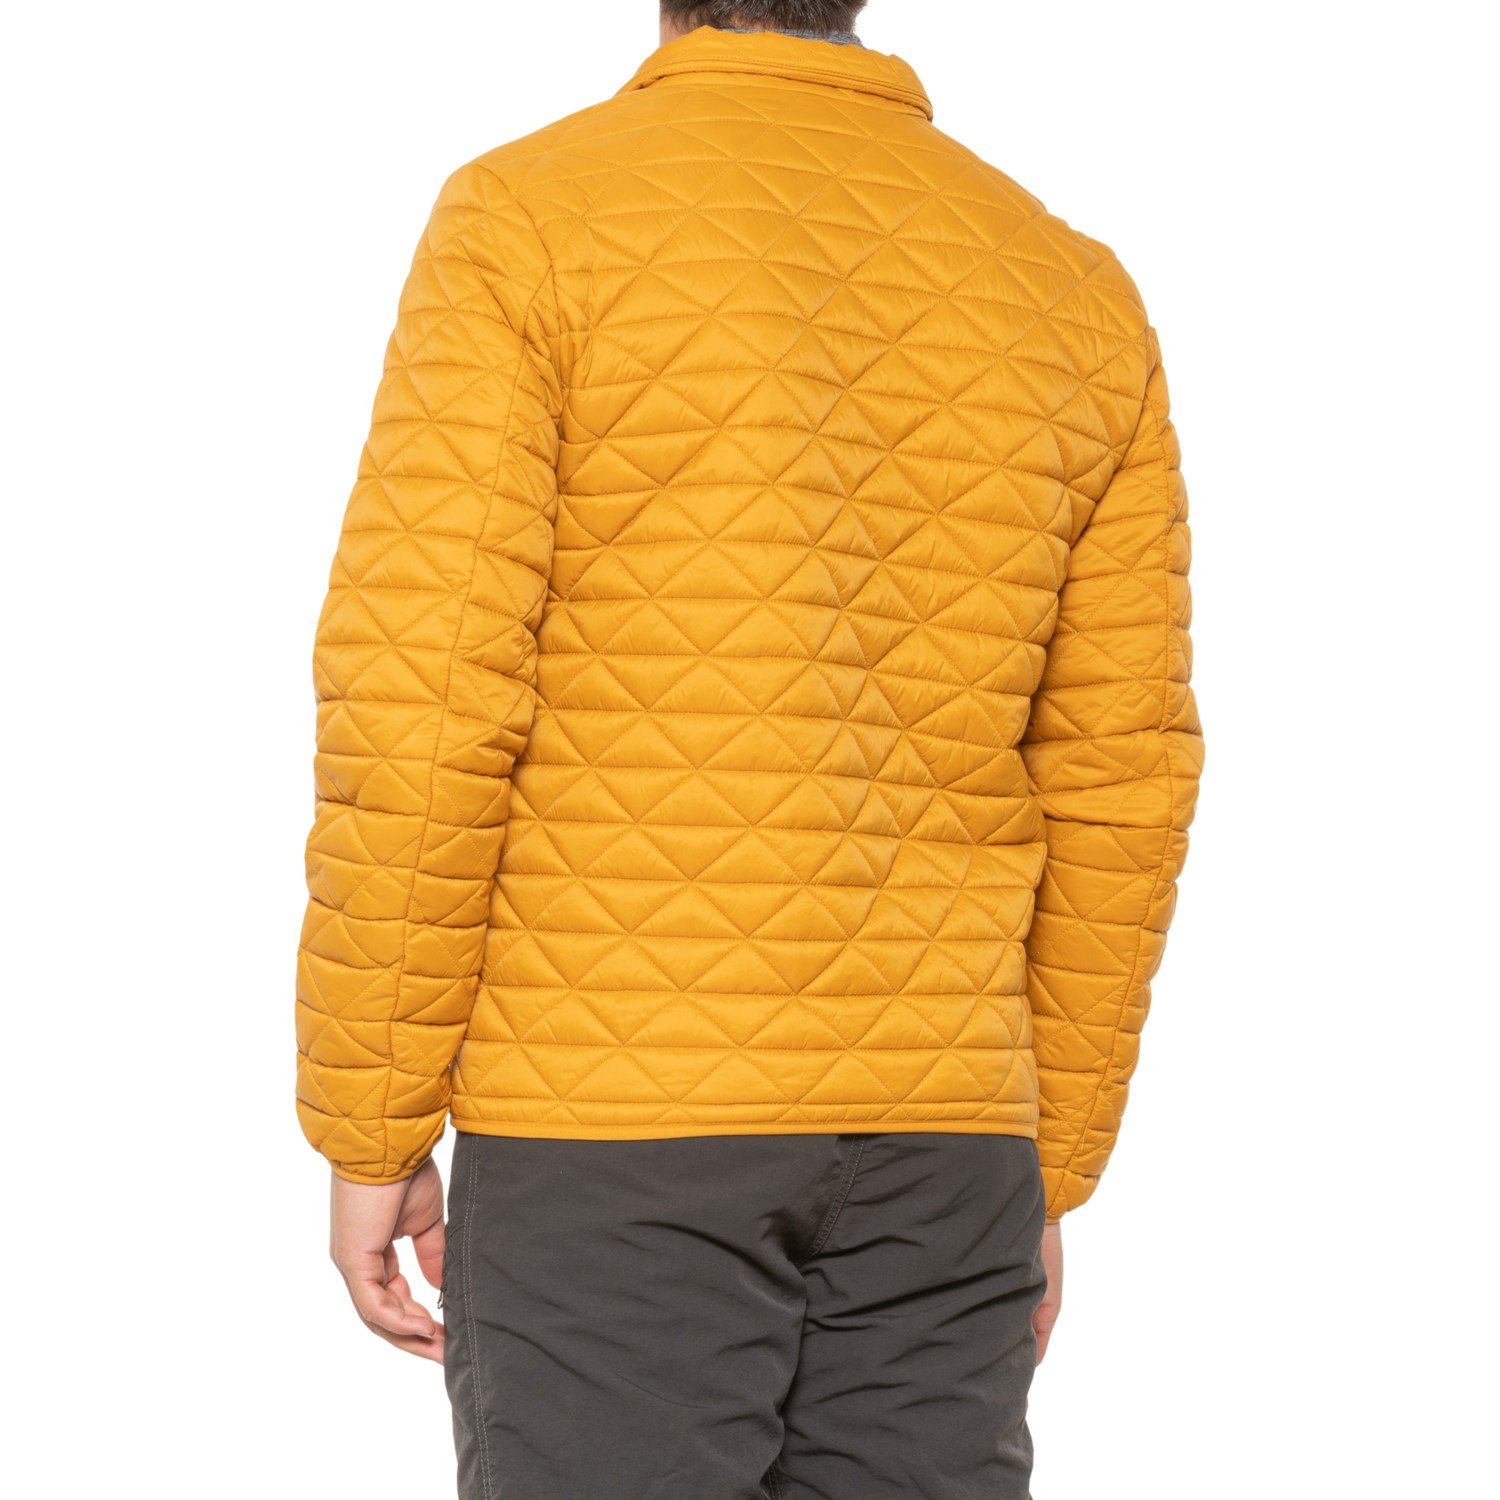 Bass Outdoor New Diamond Quilted Packable Jacket (For Men) - Save 56%